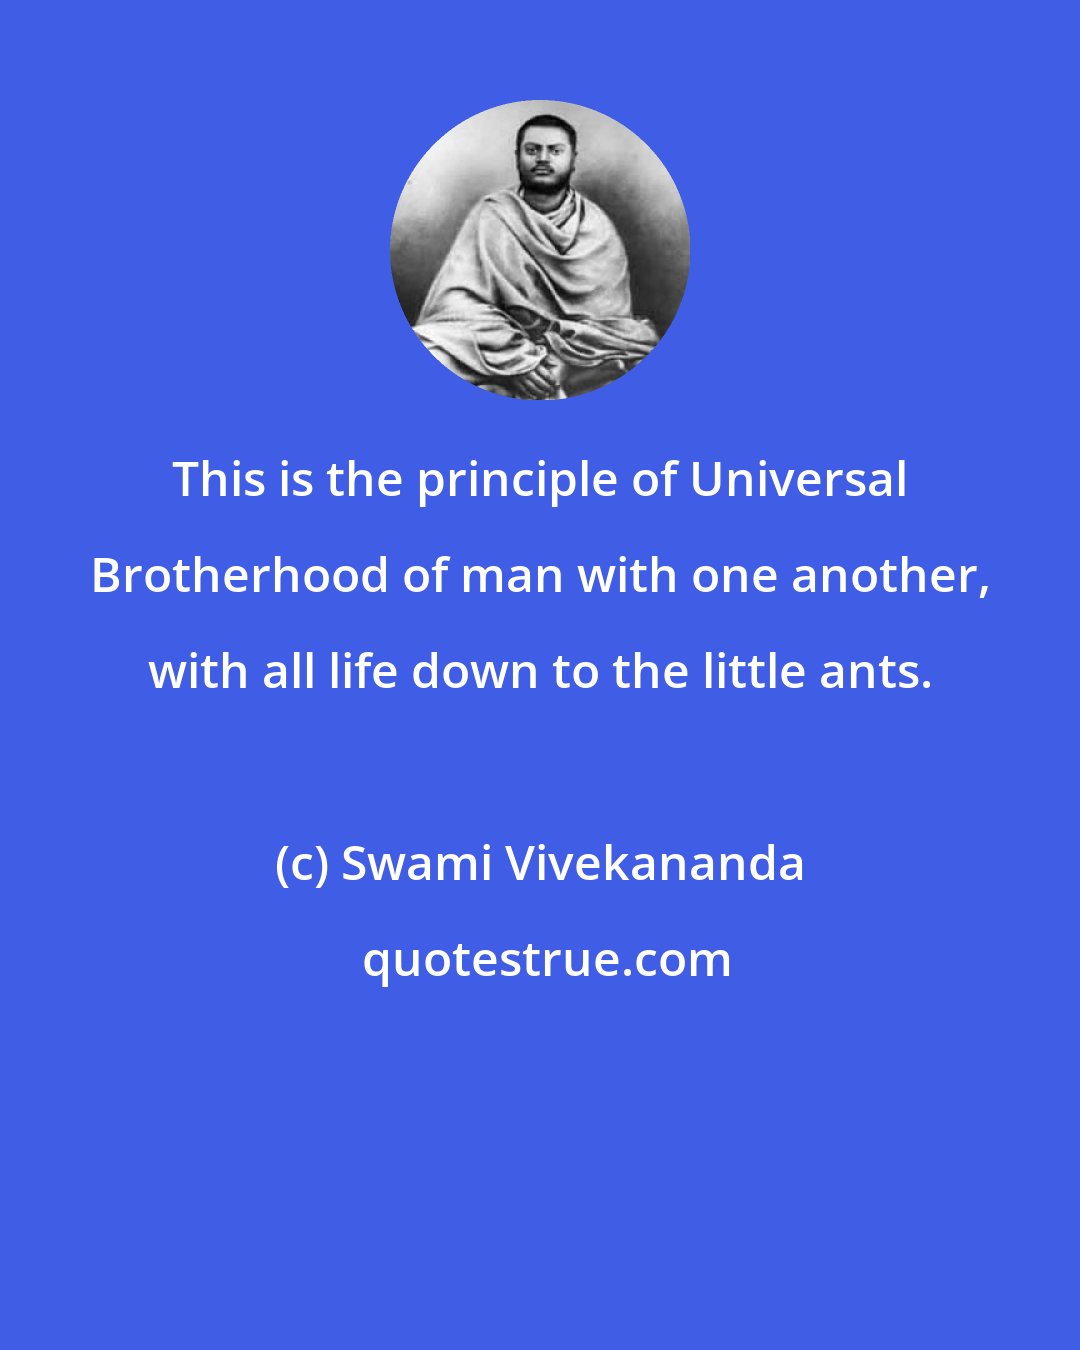 Swami Vivekananda: This is the principle of Universal Brotherhood of man with one another, with all life down to the little ants.